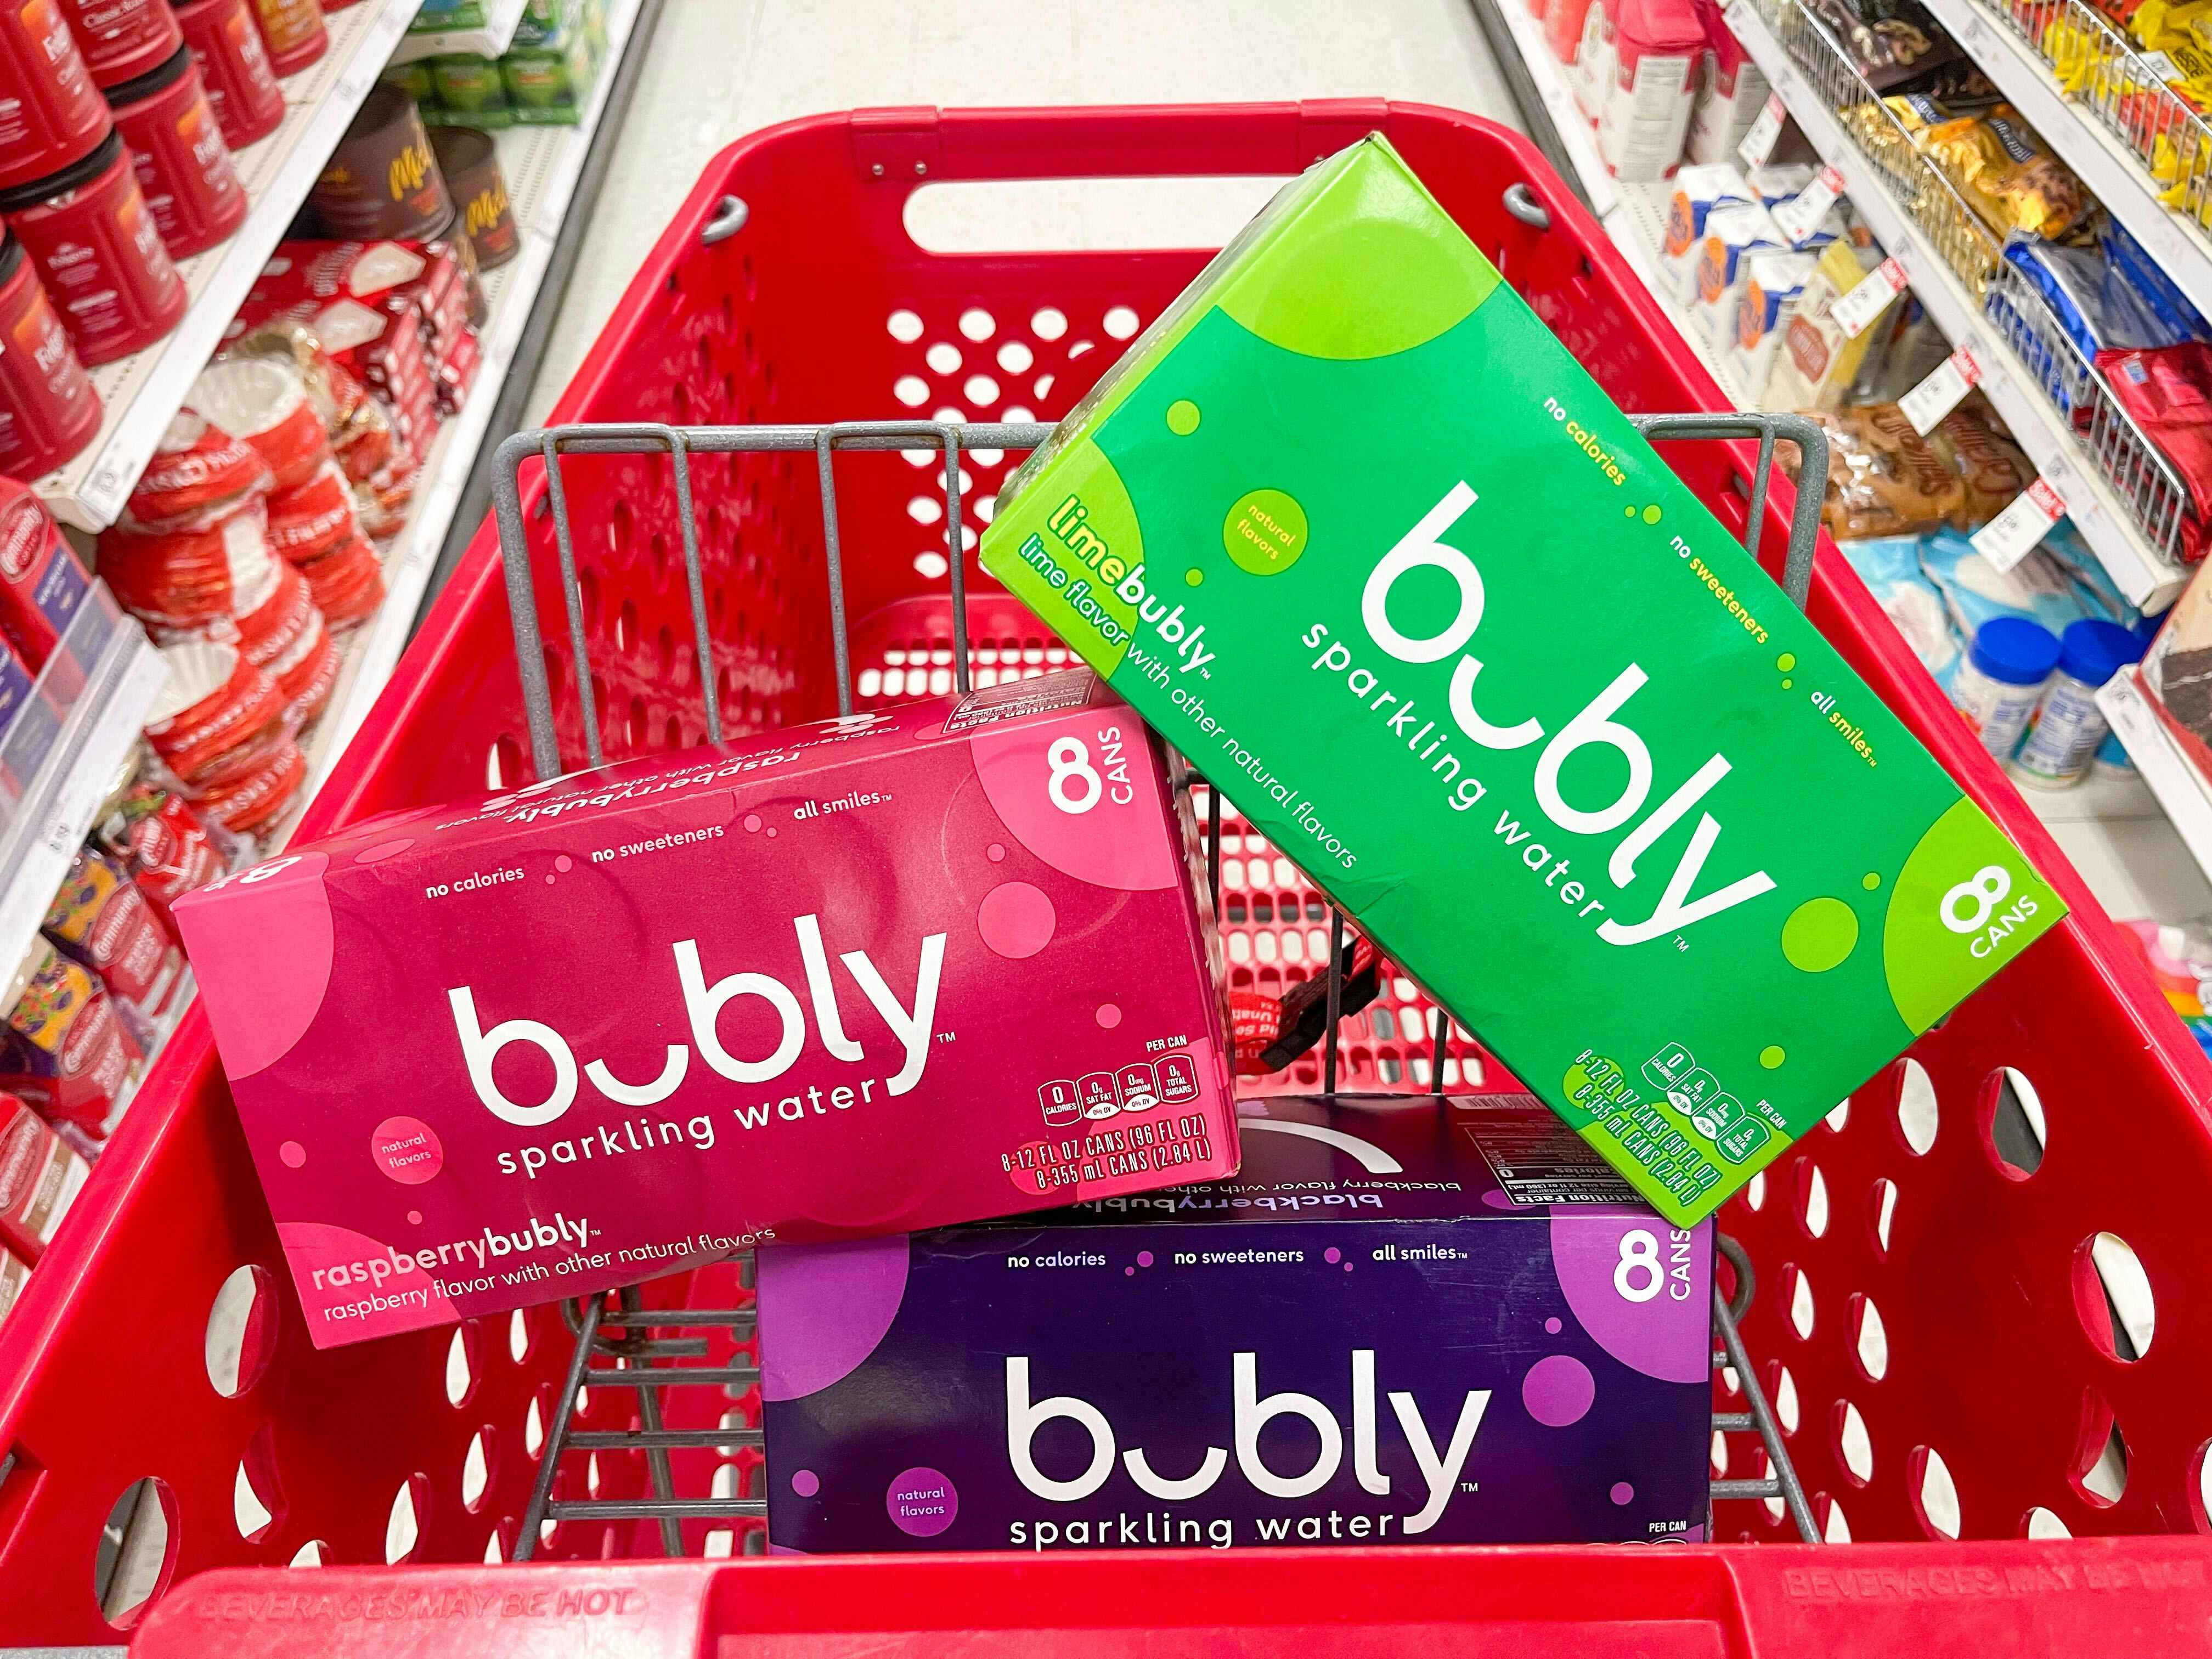 A variety of bubly sitting in a store cart.